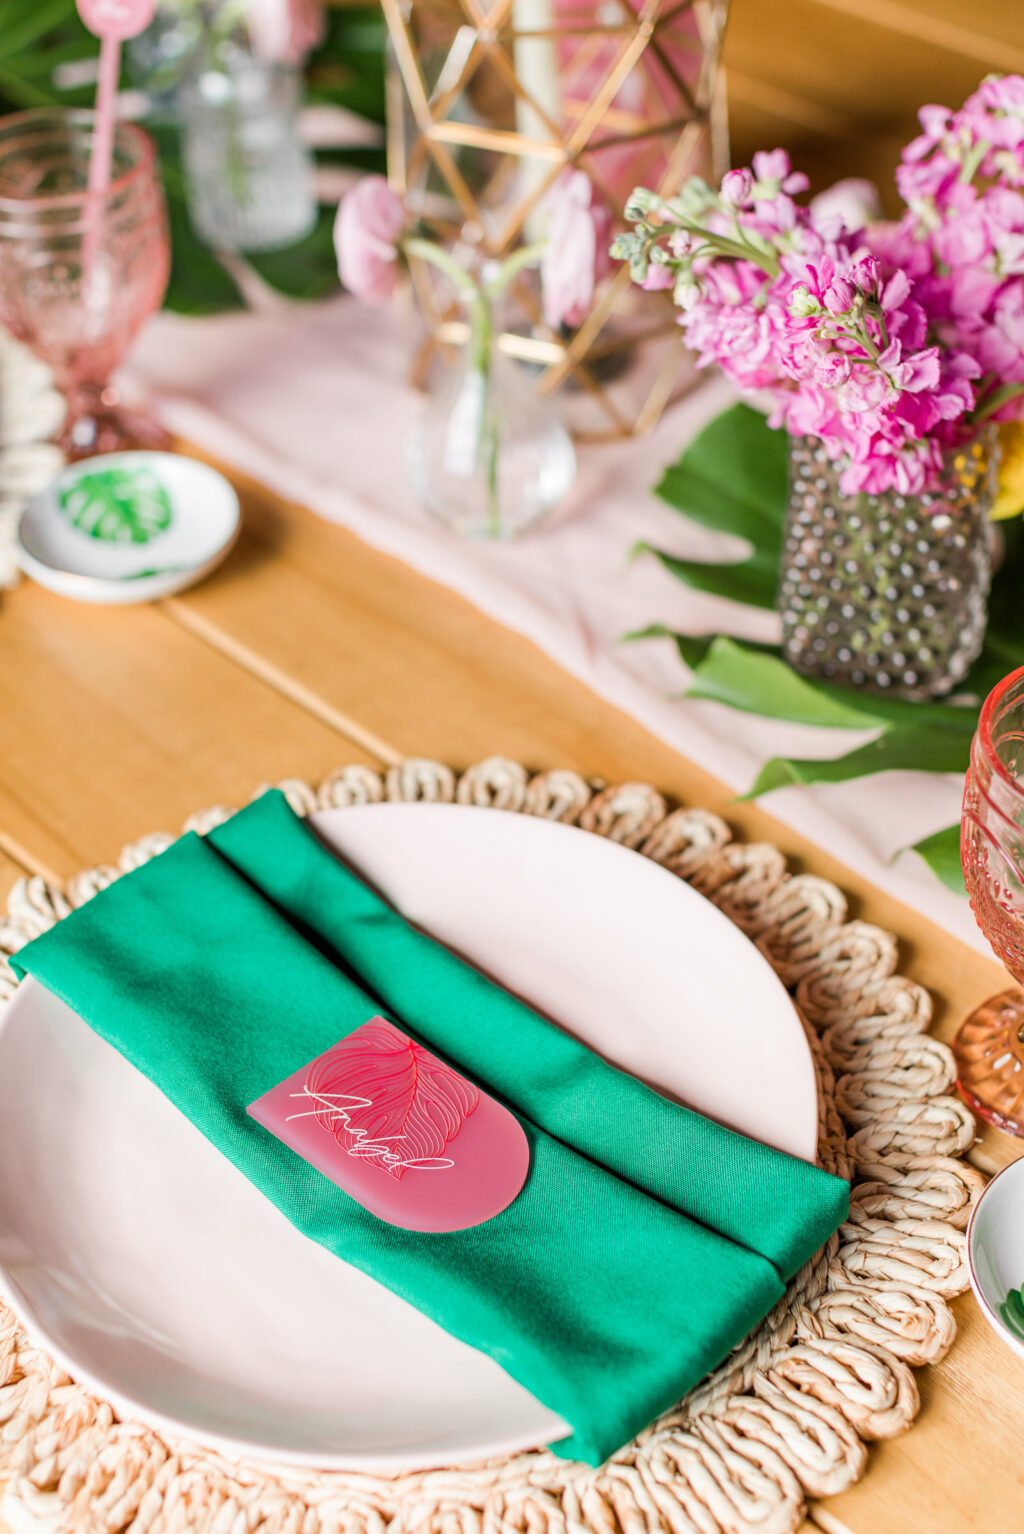 Boho Mid-Century Modern Wedding Reception Decor, Sweetheart Table, Wicker Charger, Plate with Turquoise Linen Napkin with Coral Pink Acrylic Rounded Name Place Card, Purple Flowers | Florida Wedding Planner Coastal Coordinating | Big Fake Wedding Tampa